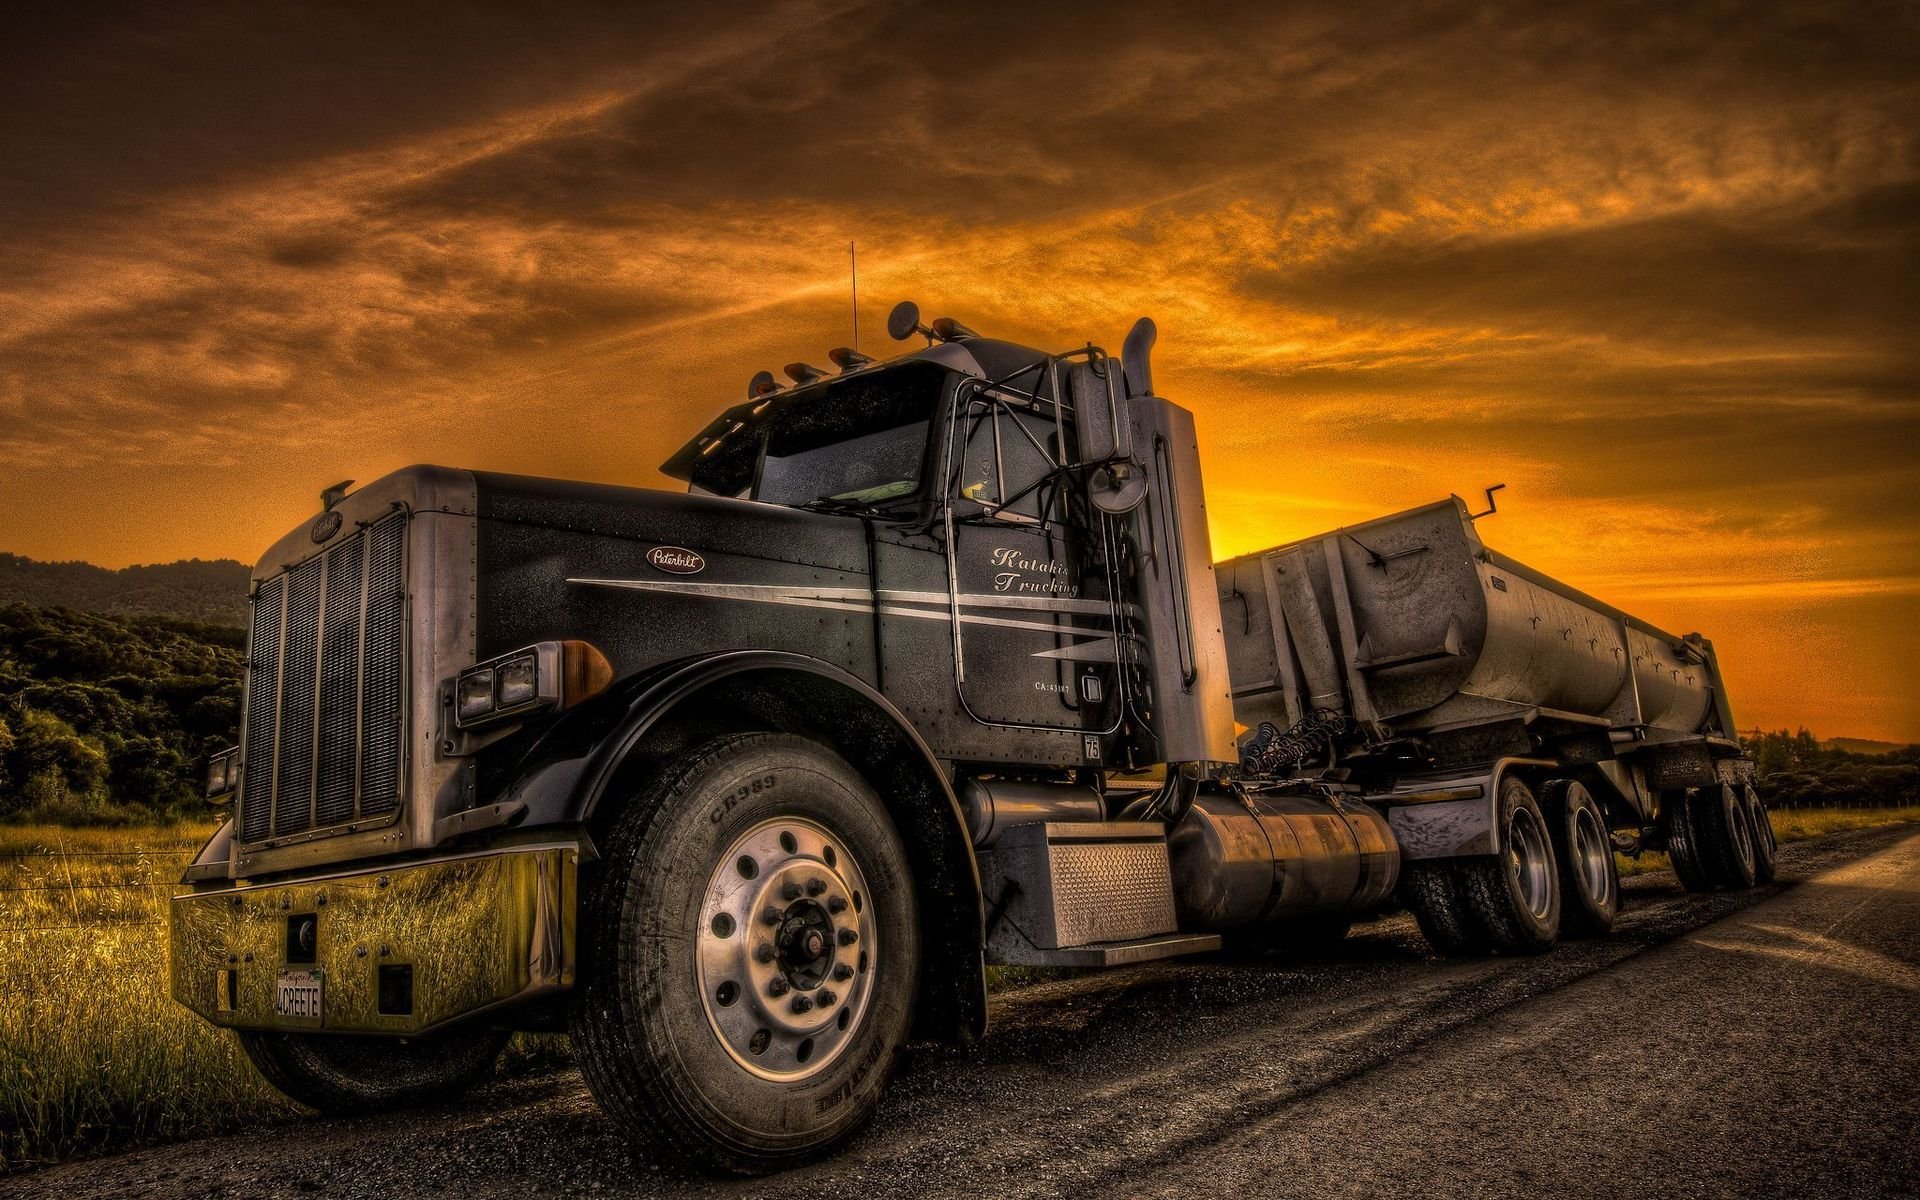 Truck Wallpaper Collection (42+)